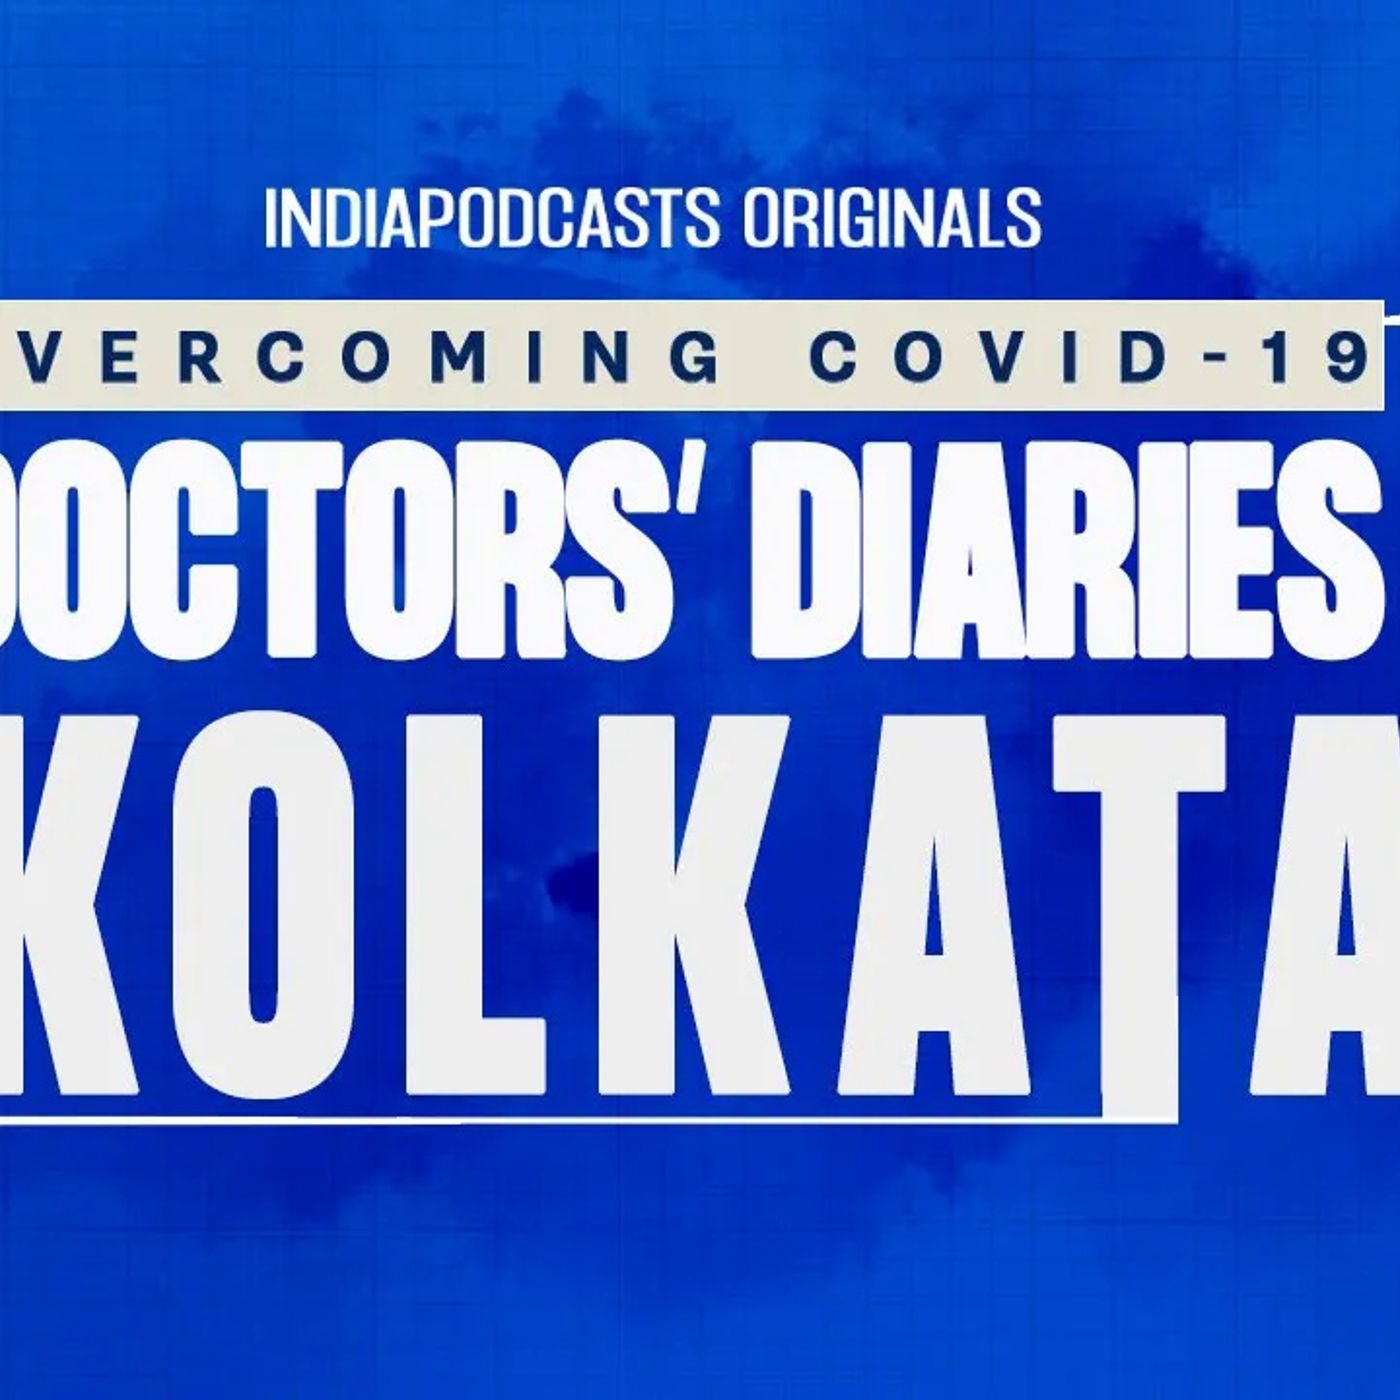 Kolkata Front-line Doctors’ Stories Of COVID-19 | Doctors’ Diaries | IndiaPodcasts Originals